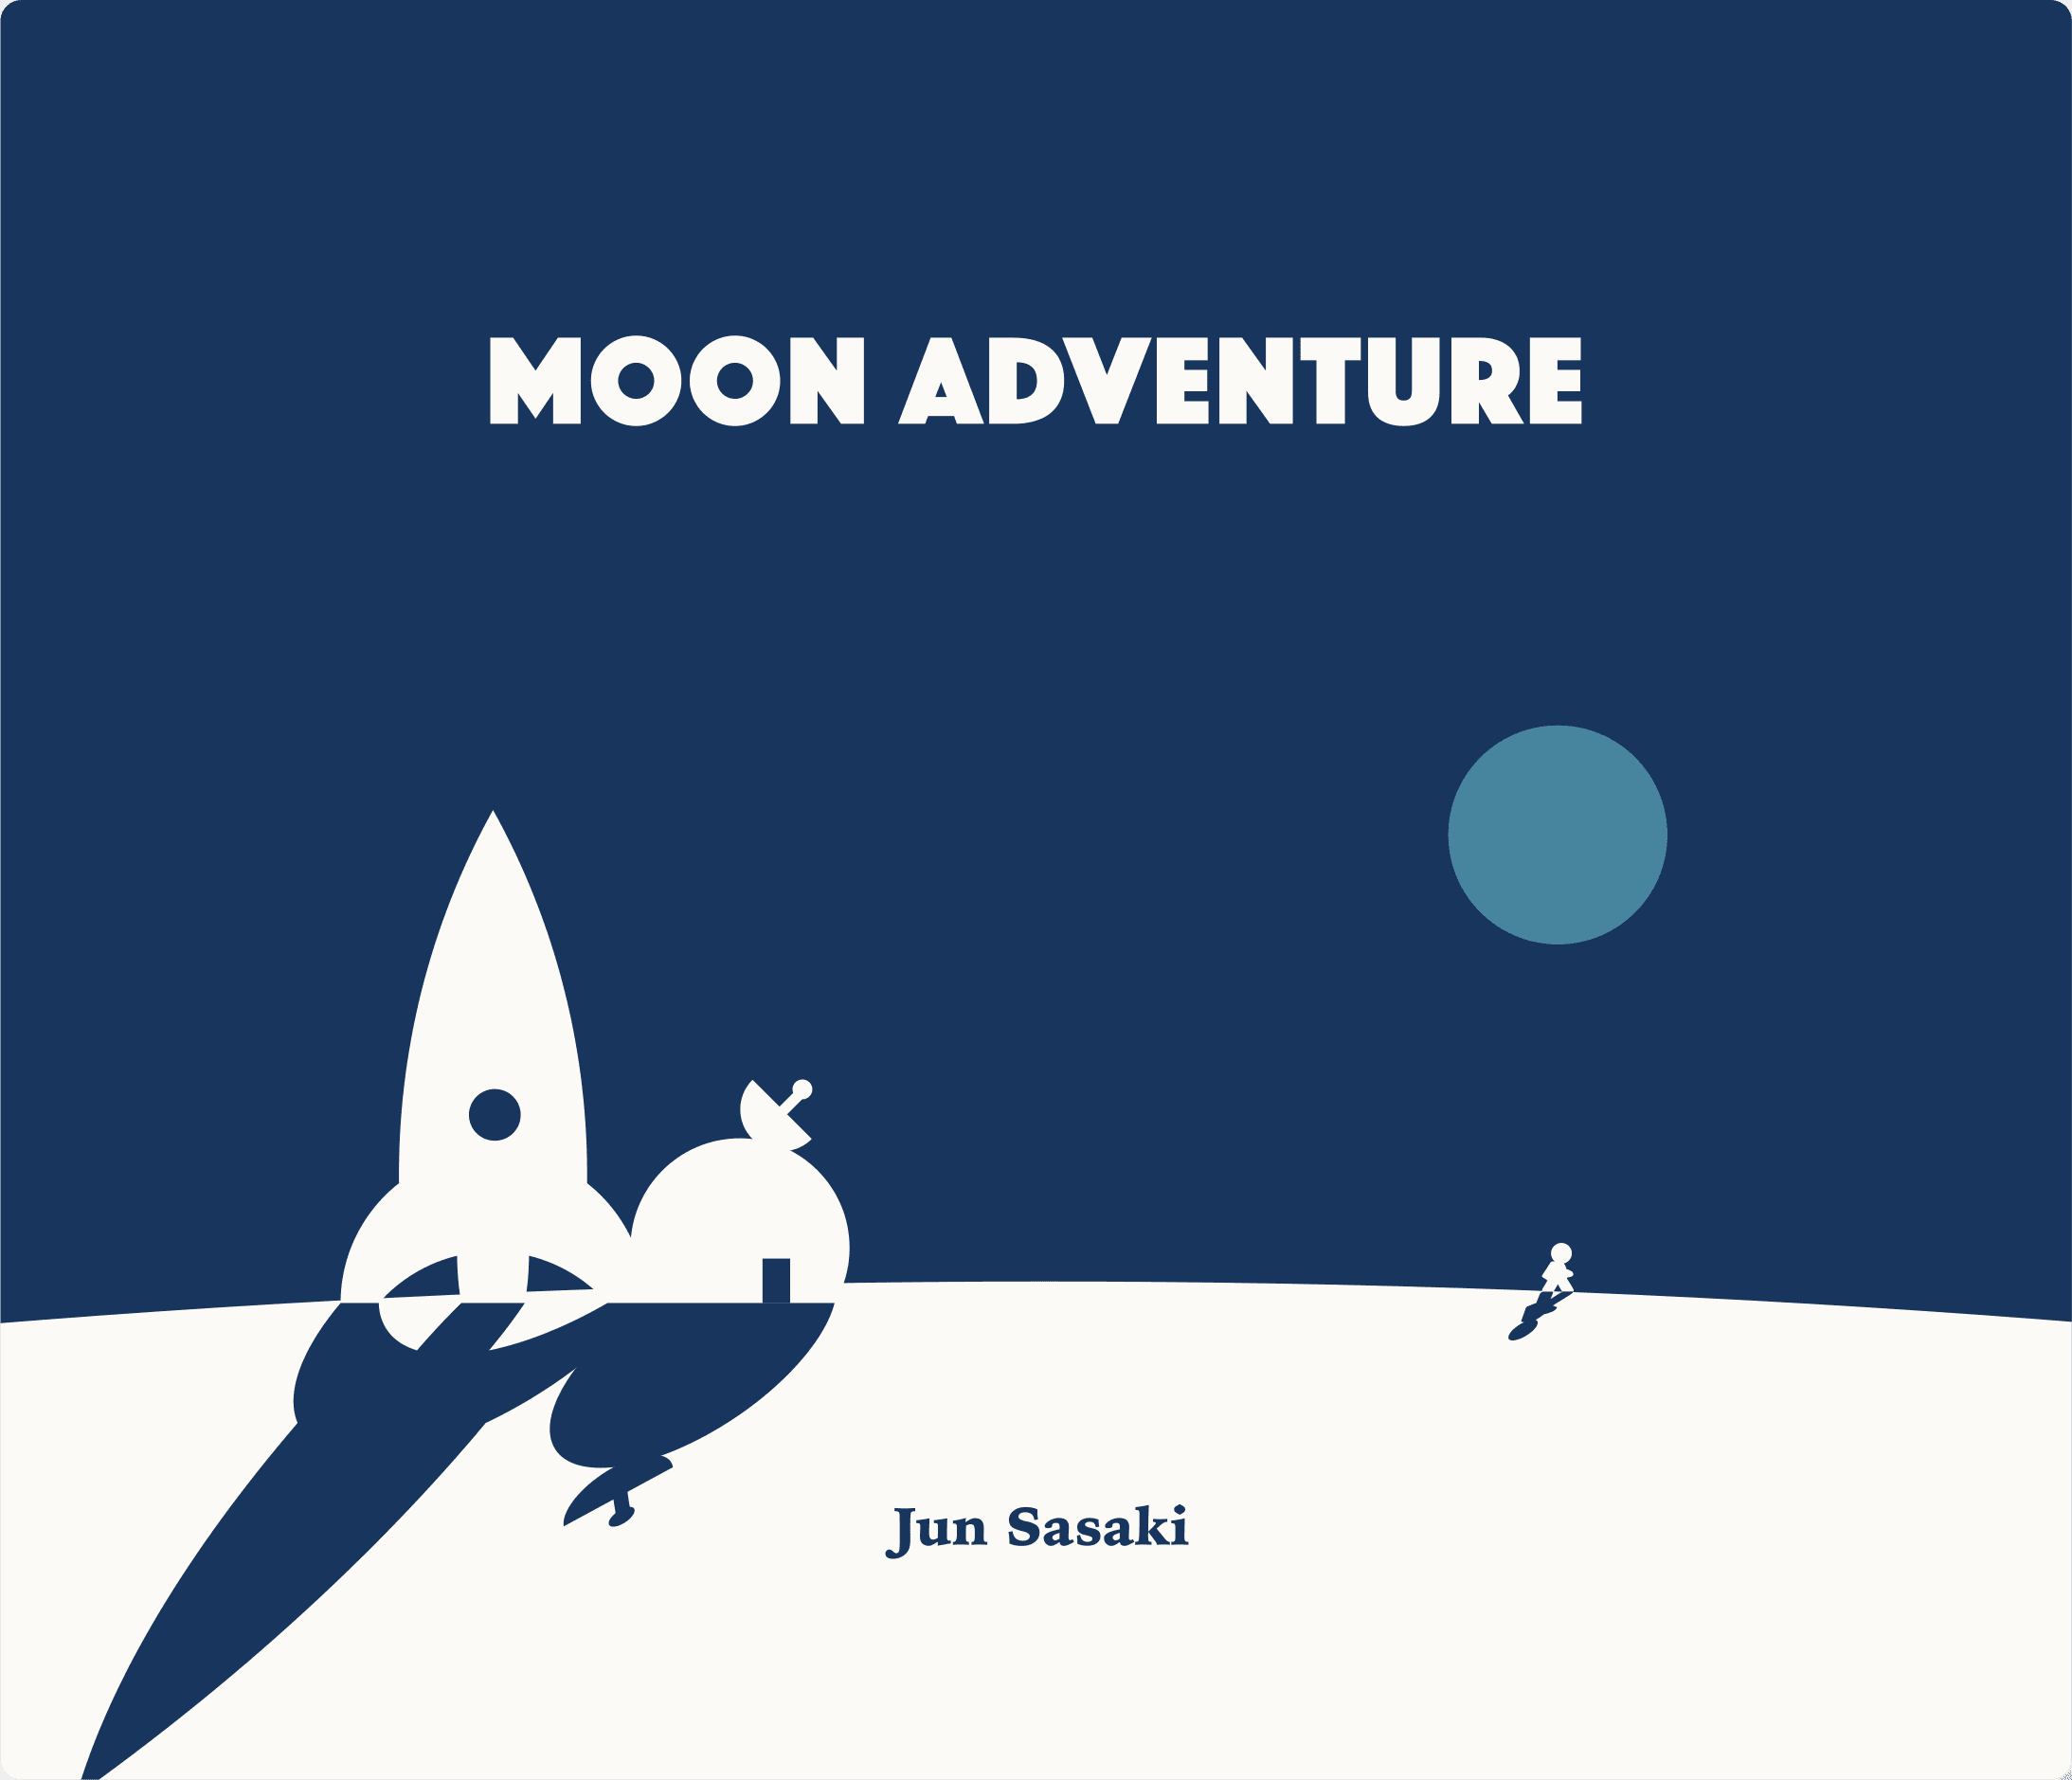 Adventure moon. Moon Adventure. Moon Adventure настольная игра. From the Moon настольная игра. Moon Adventure to New World.